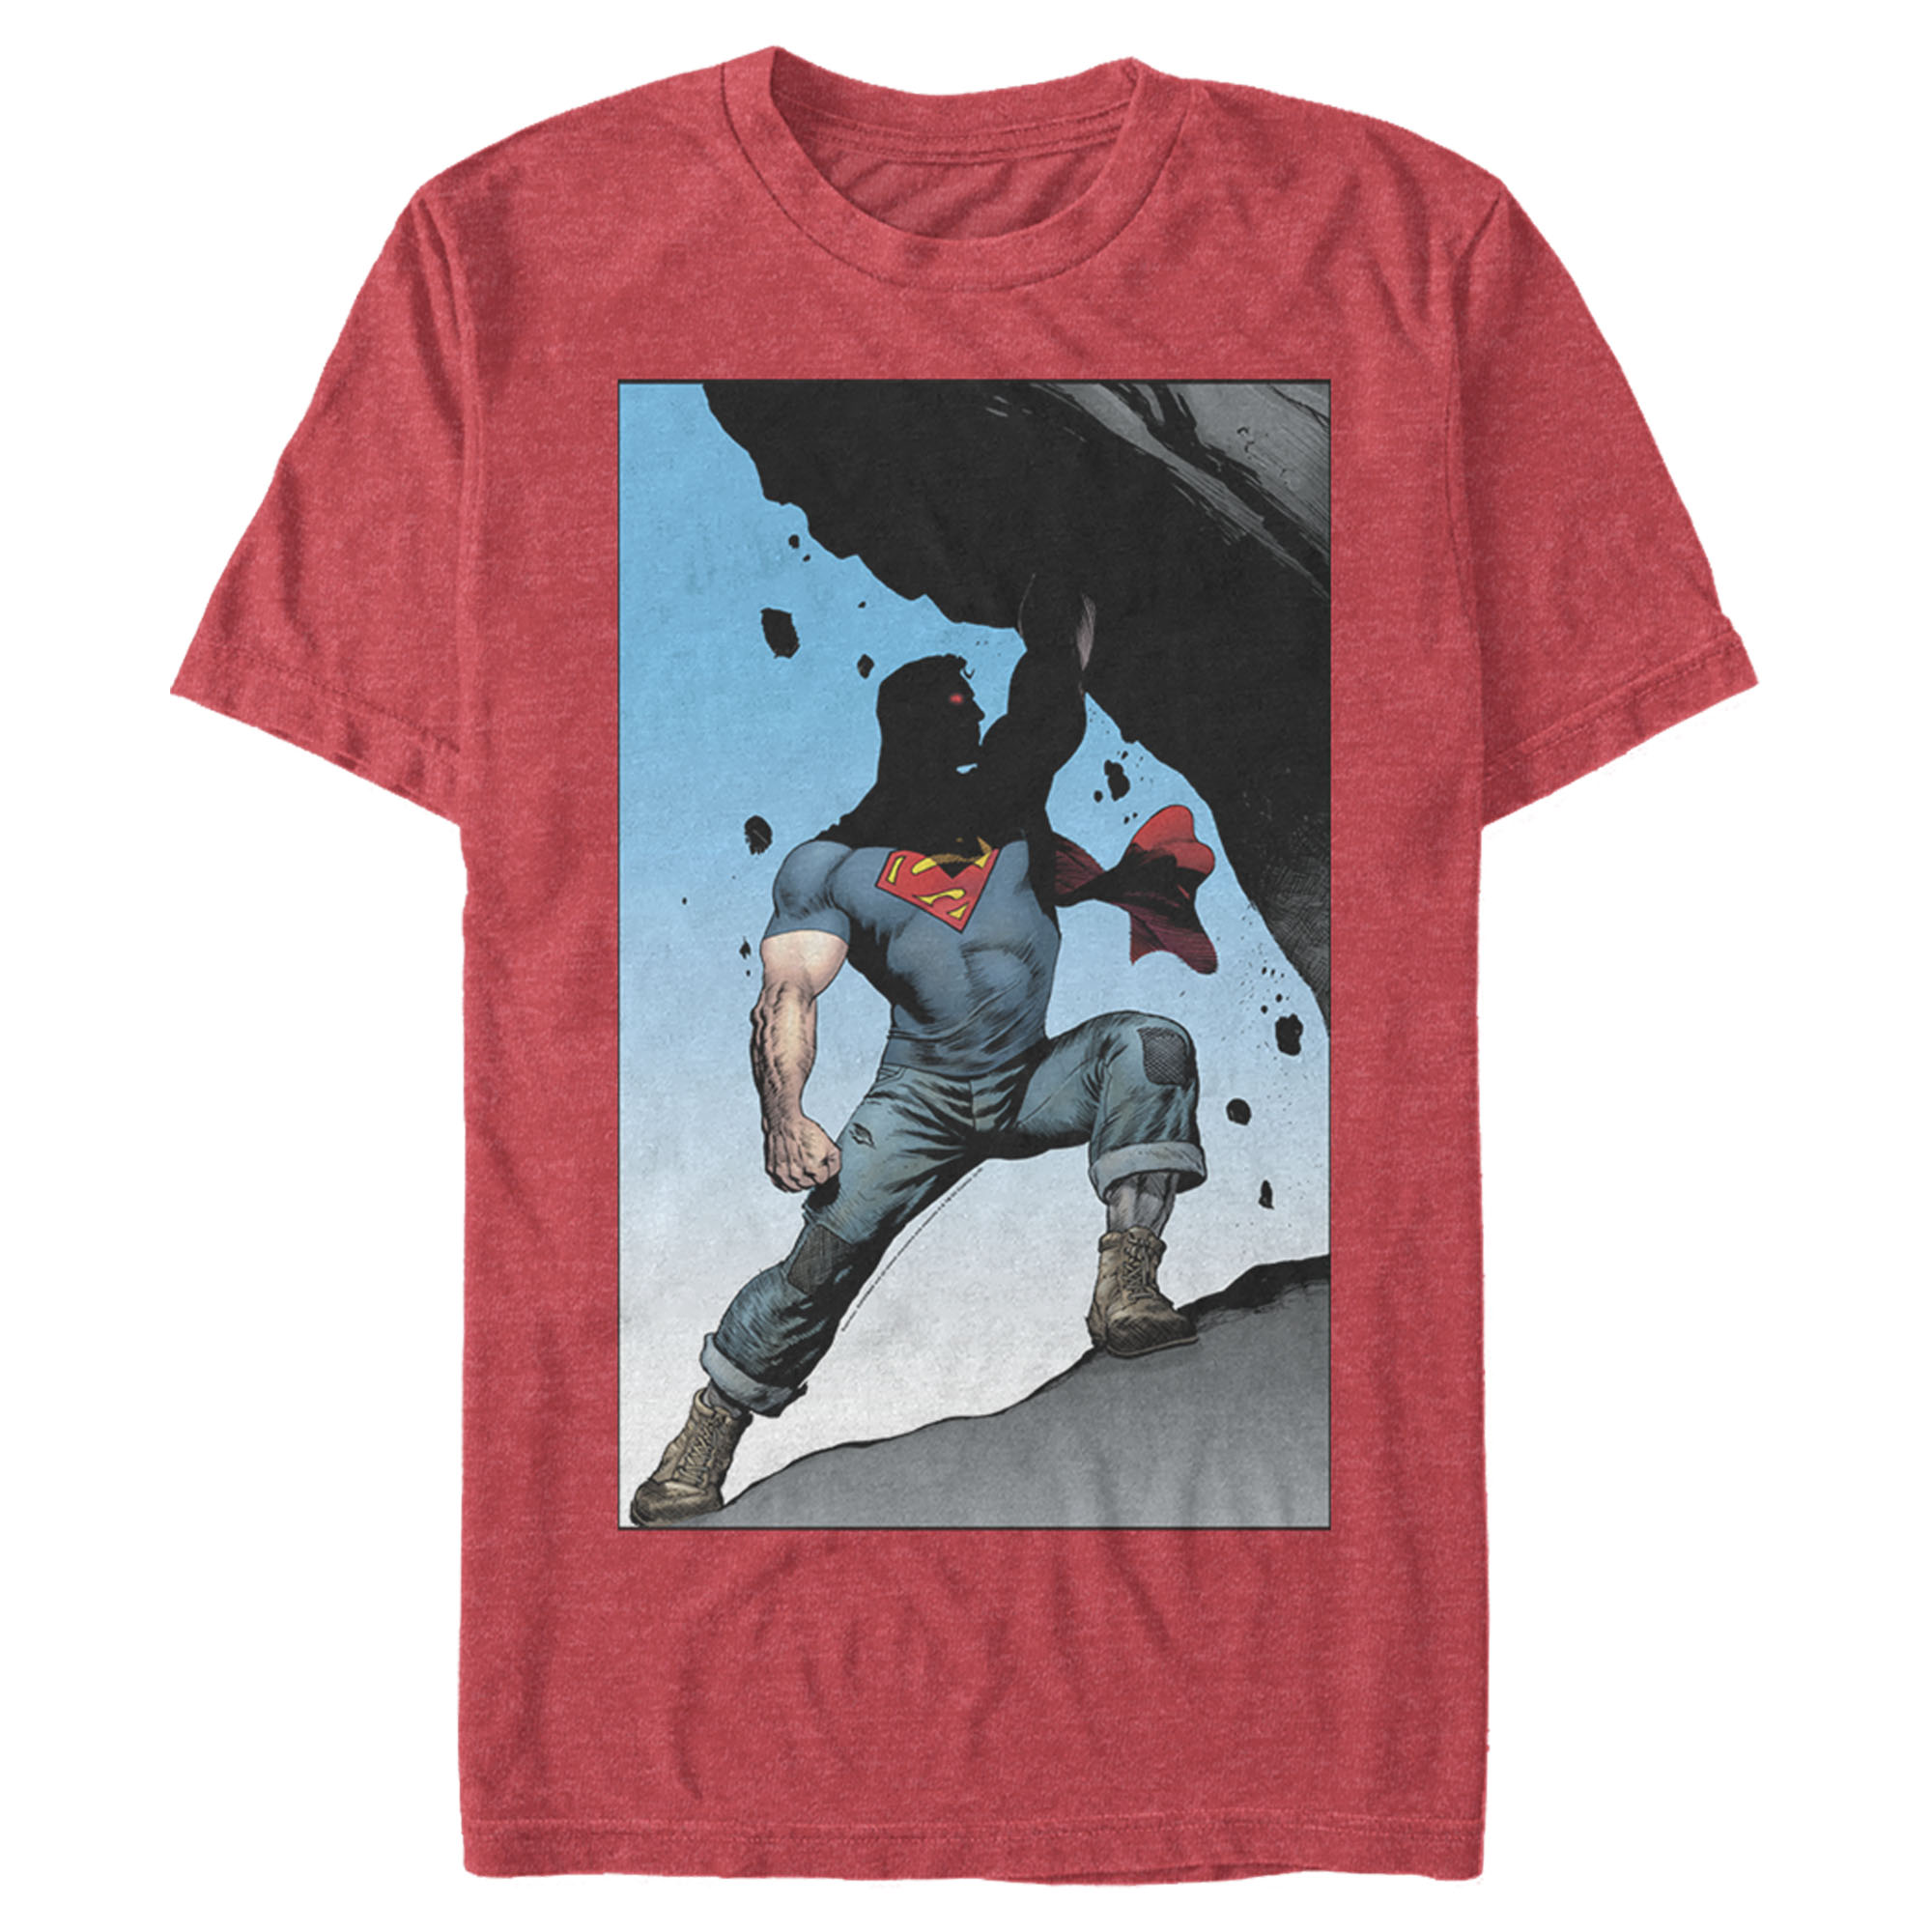 Men's Superman Strongest Hero Pose  Graphic Tee Red Heather 3X Large - image 1 of 4